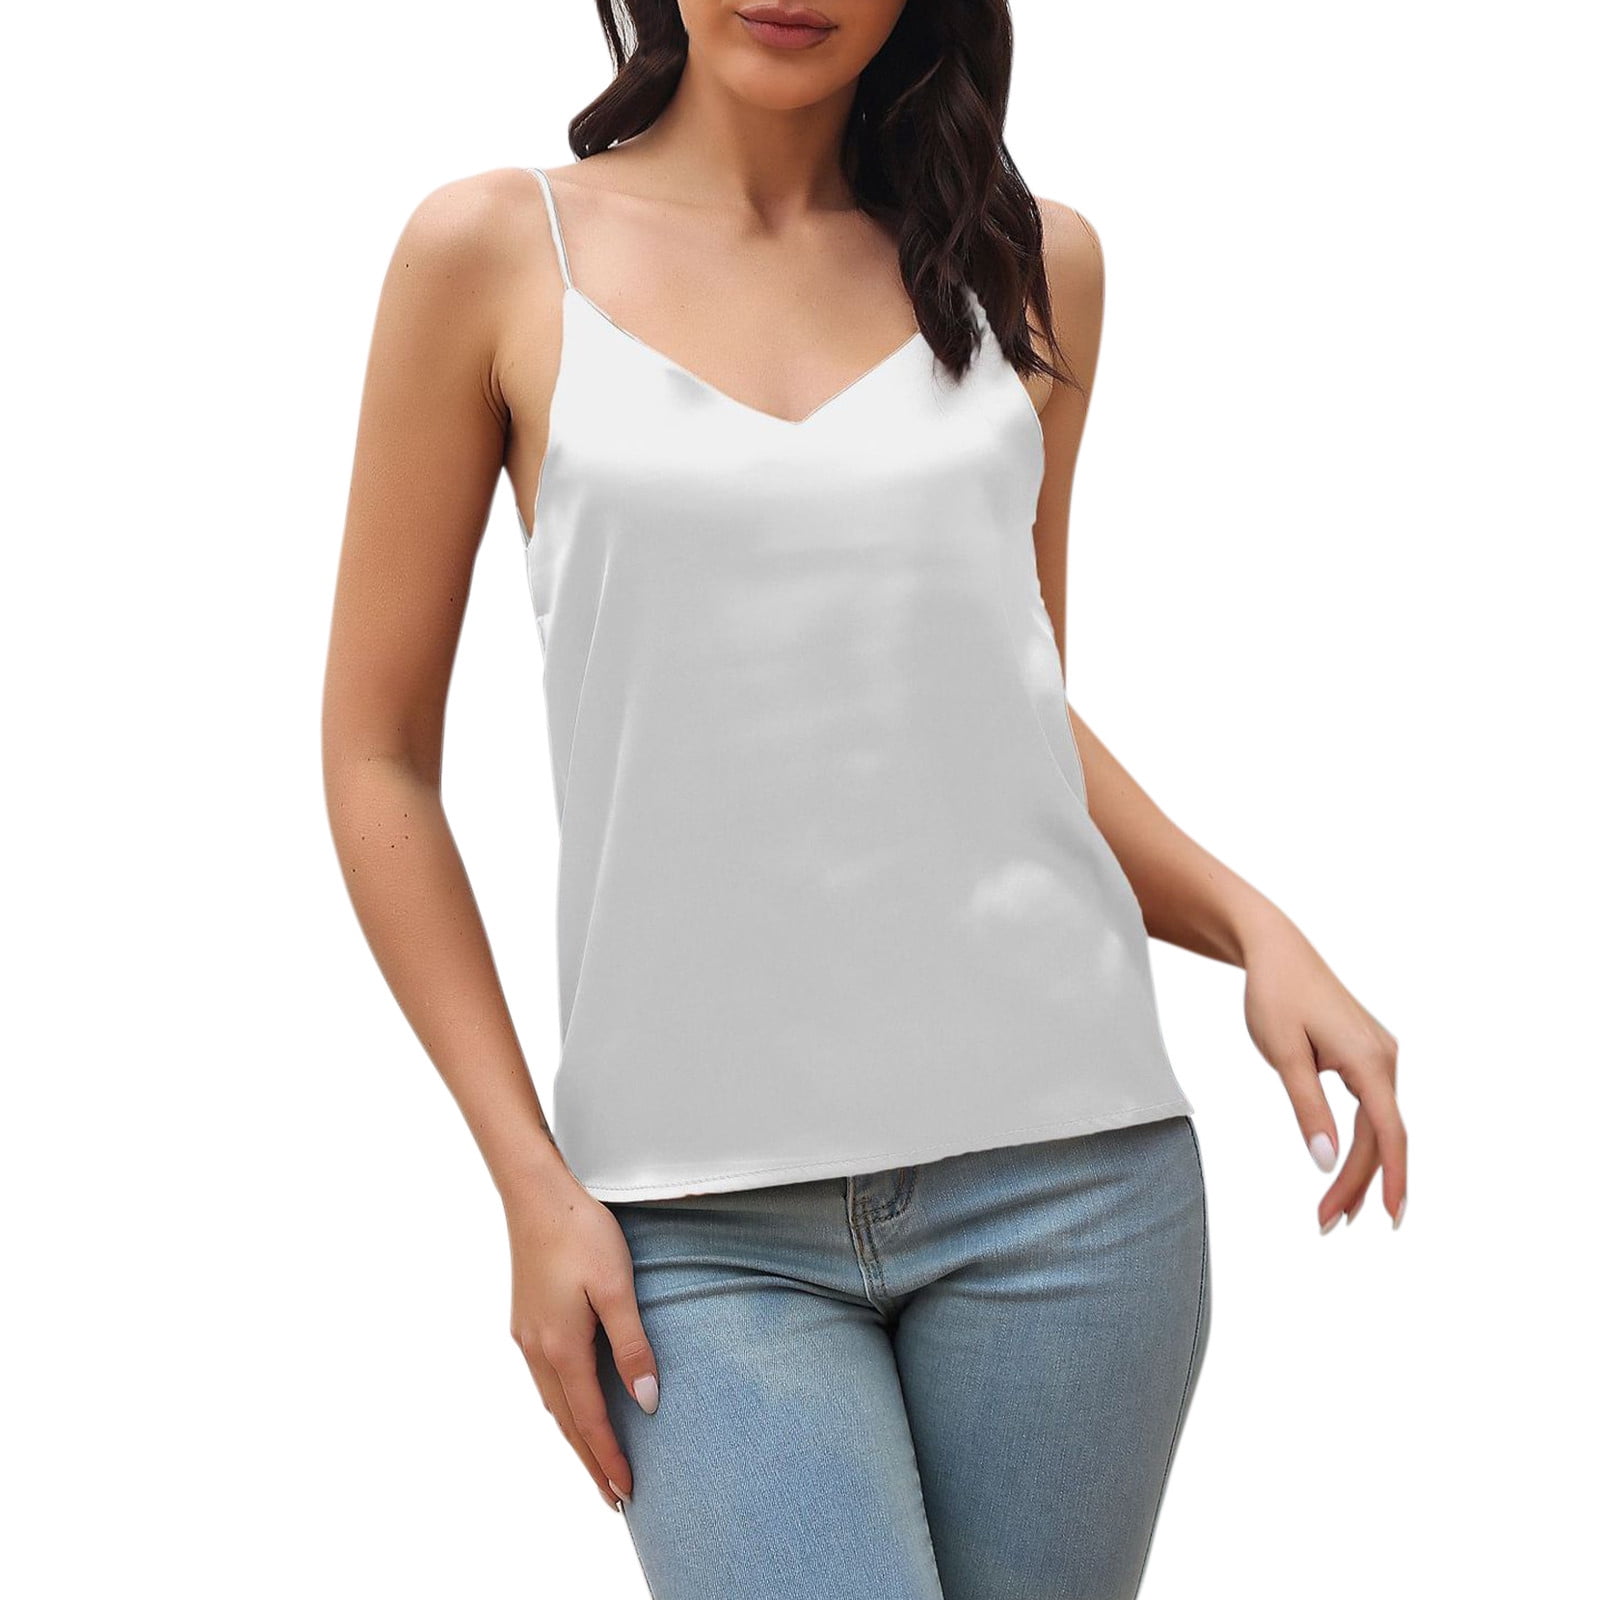 xingqing Women Spaghetti Strap Camisoles Low Cut Tight Sling Tank Tops  Summer Slim Fit Vests Ivory White M